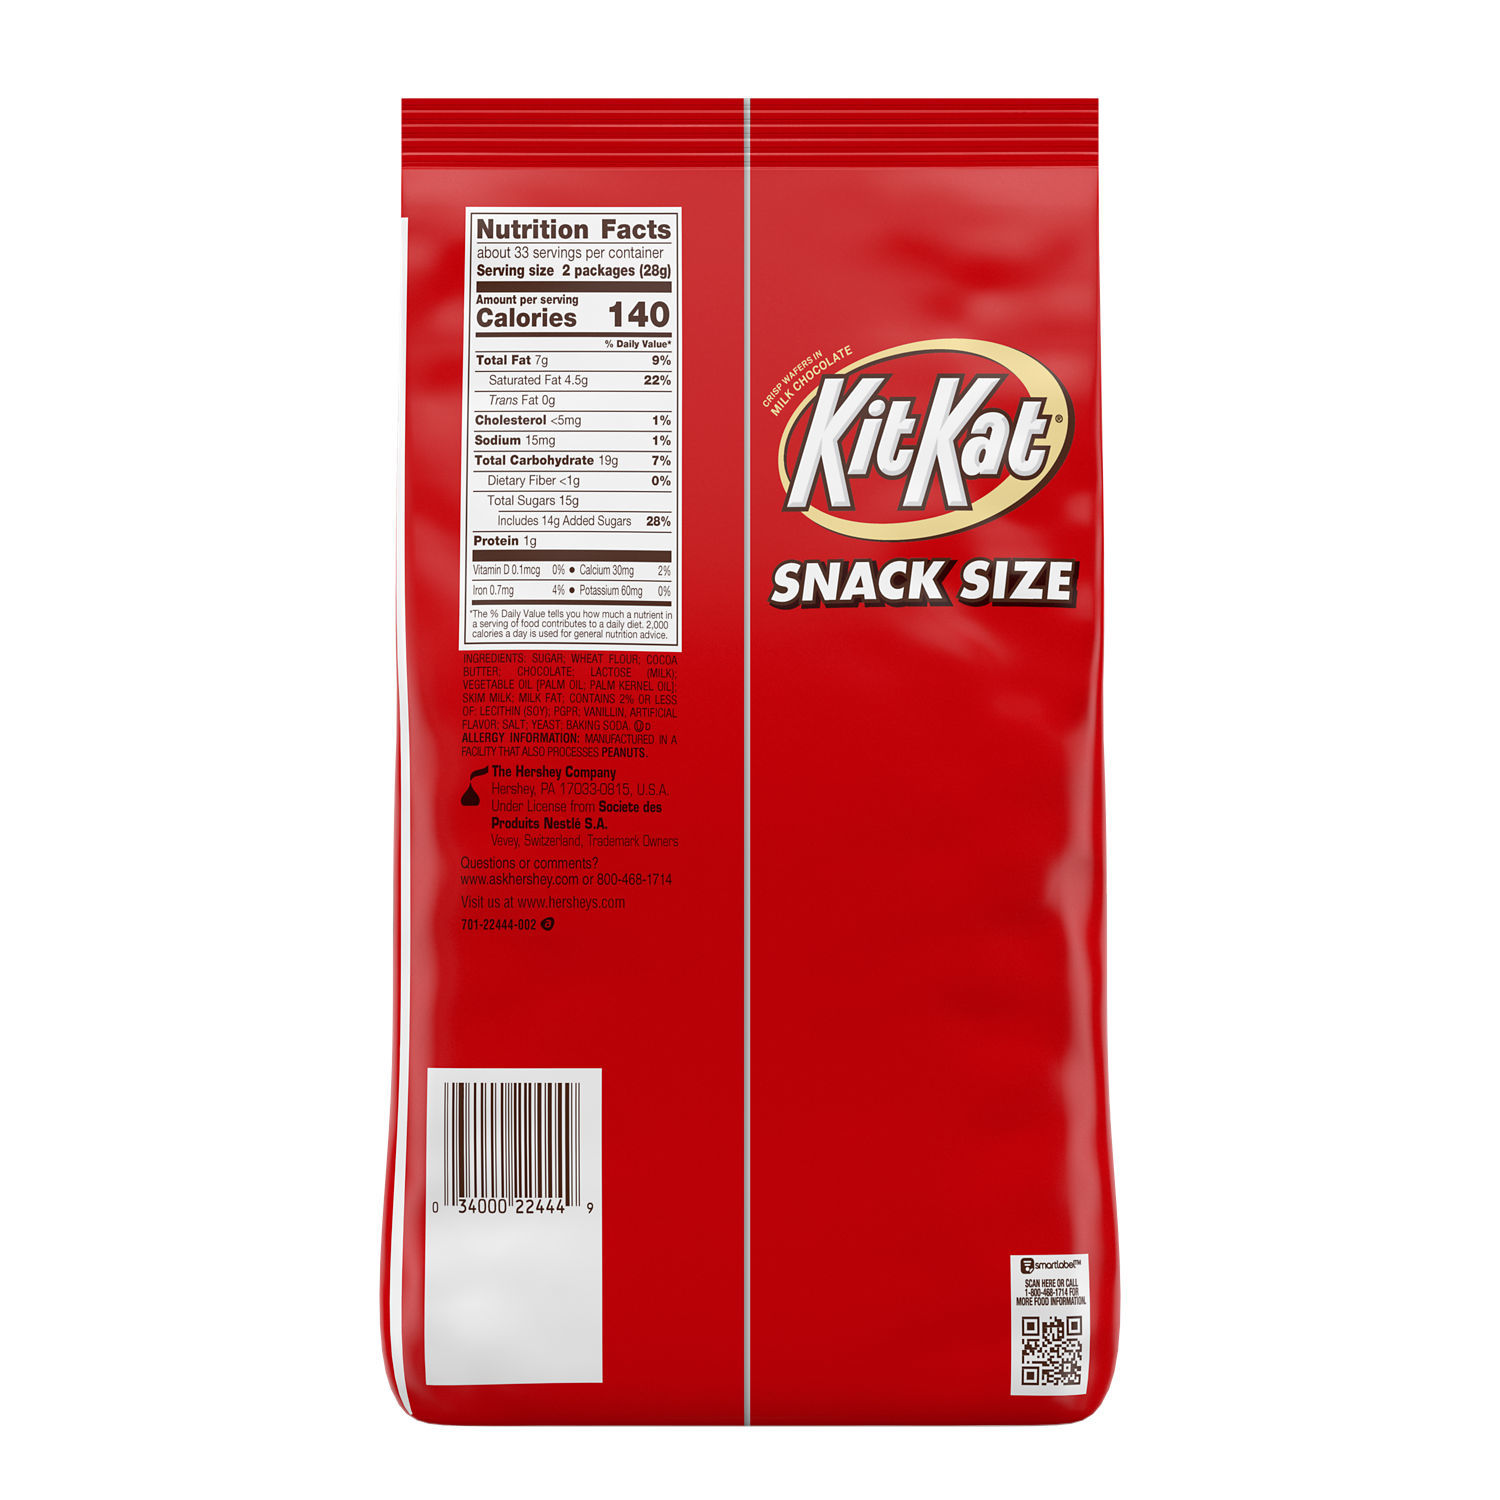 Kit Kat® Milk Chocolate Wafer Snack Size Candy, Bag 32.34 oz, 66 Pieces - image 3 of 9